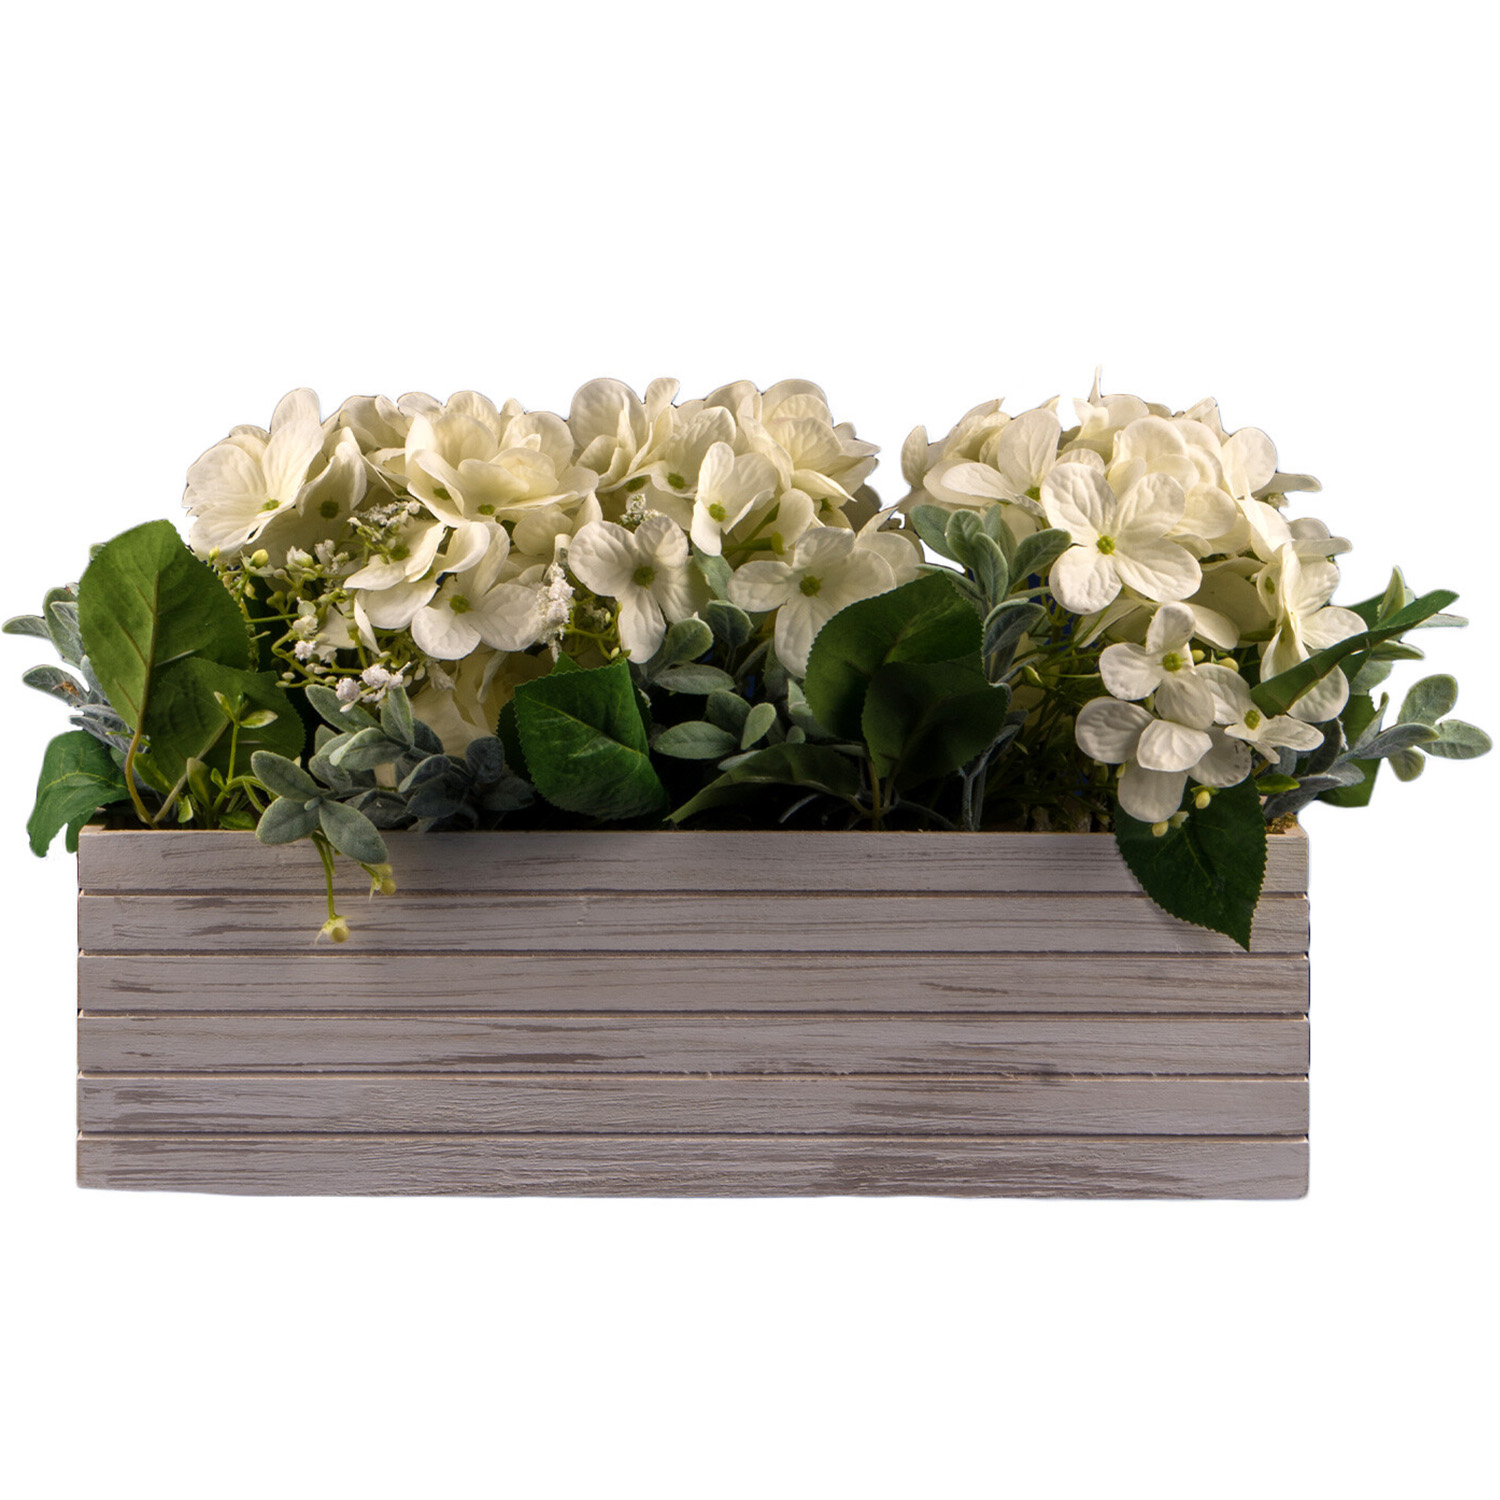 White Rose and Hydrangea Floral Tray Image